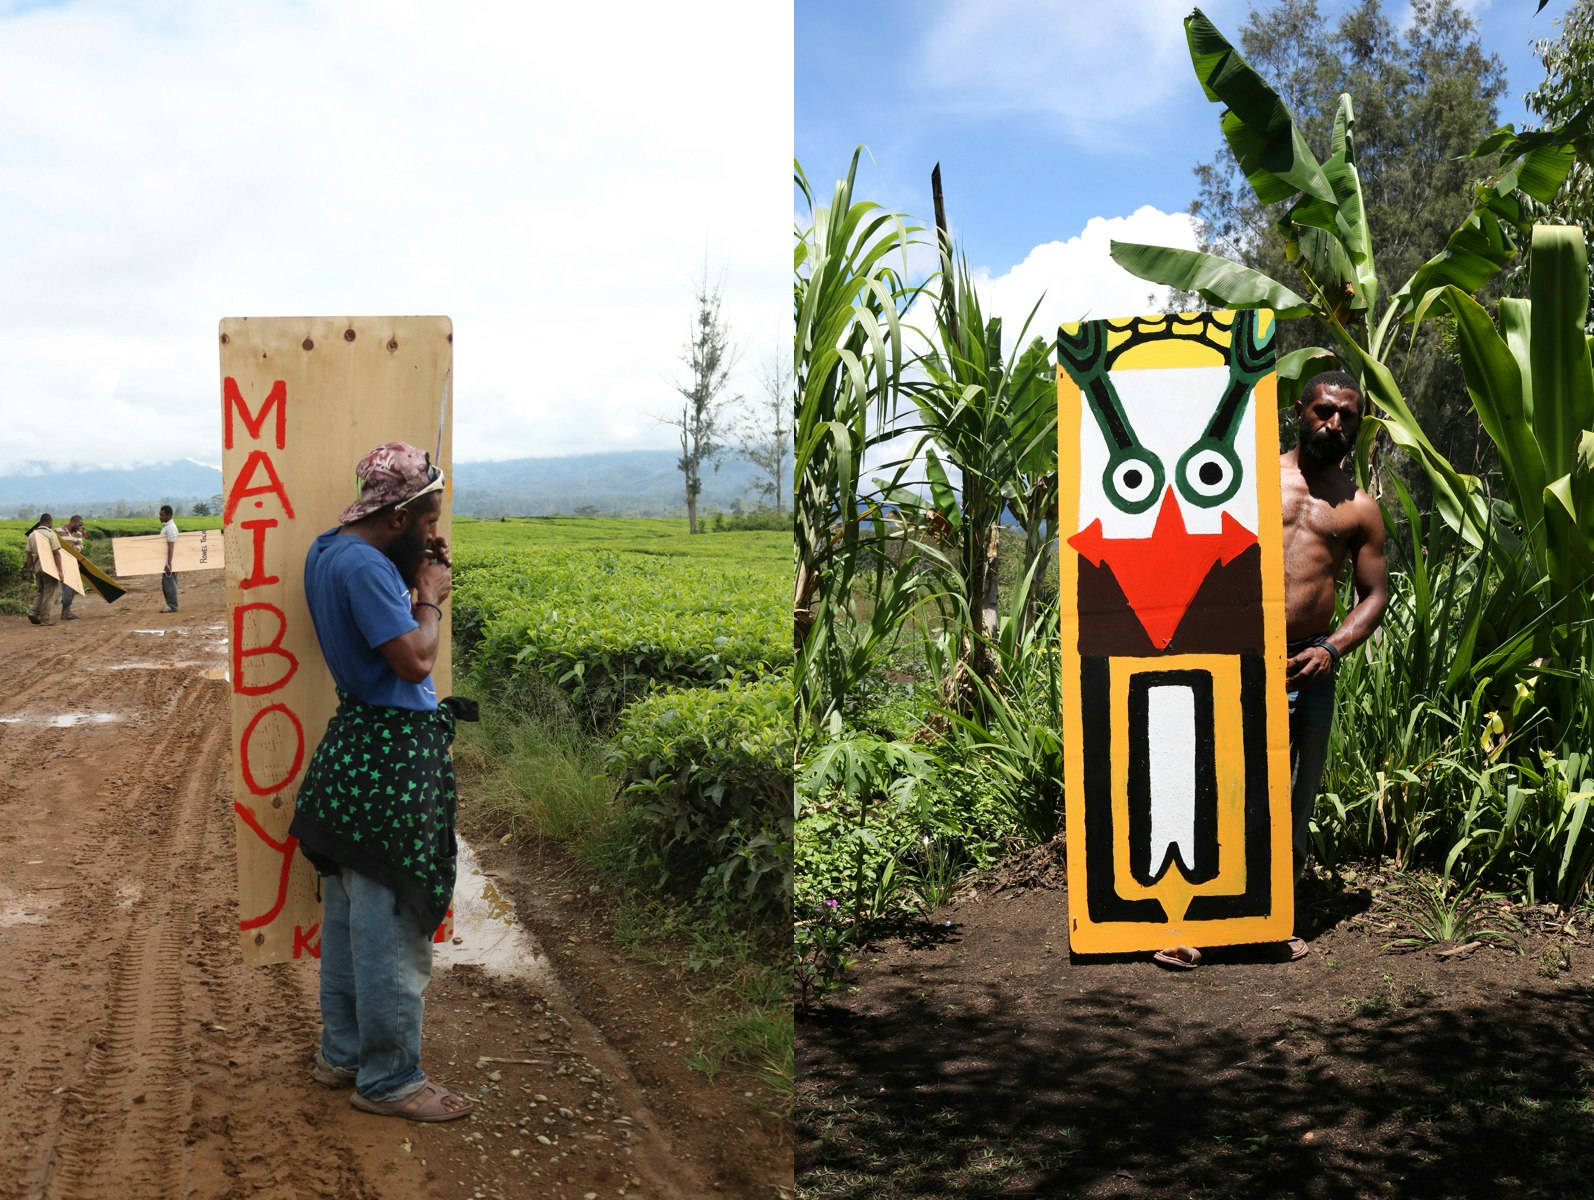 Left: a dark-skinned Pasifika man lights a cigarette while supporting his kuman on a muddy road; right: a shirtless Pasifika man stands amongst tall tropical vegetation while holding up a kuman painted with yellow and black rectangles.